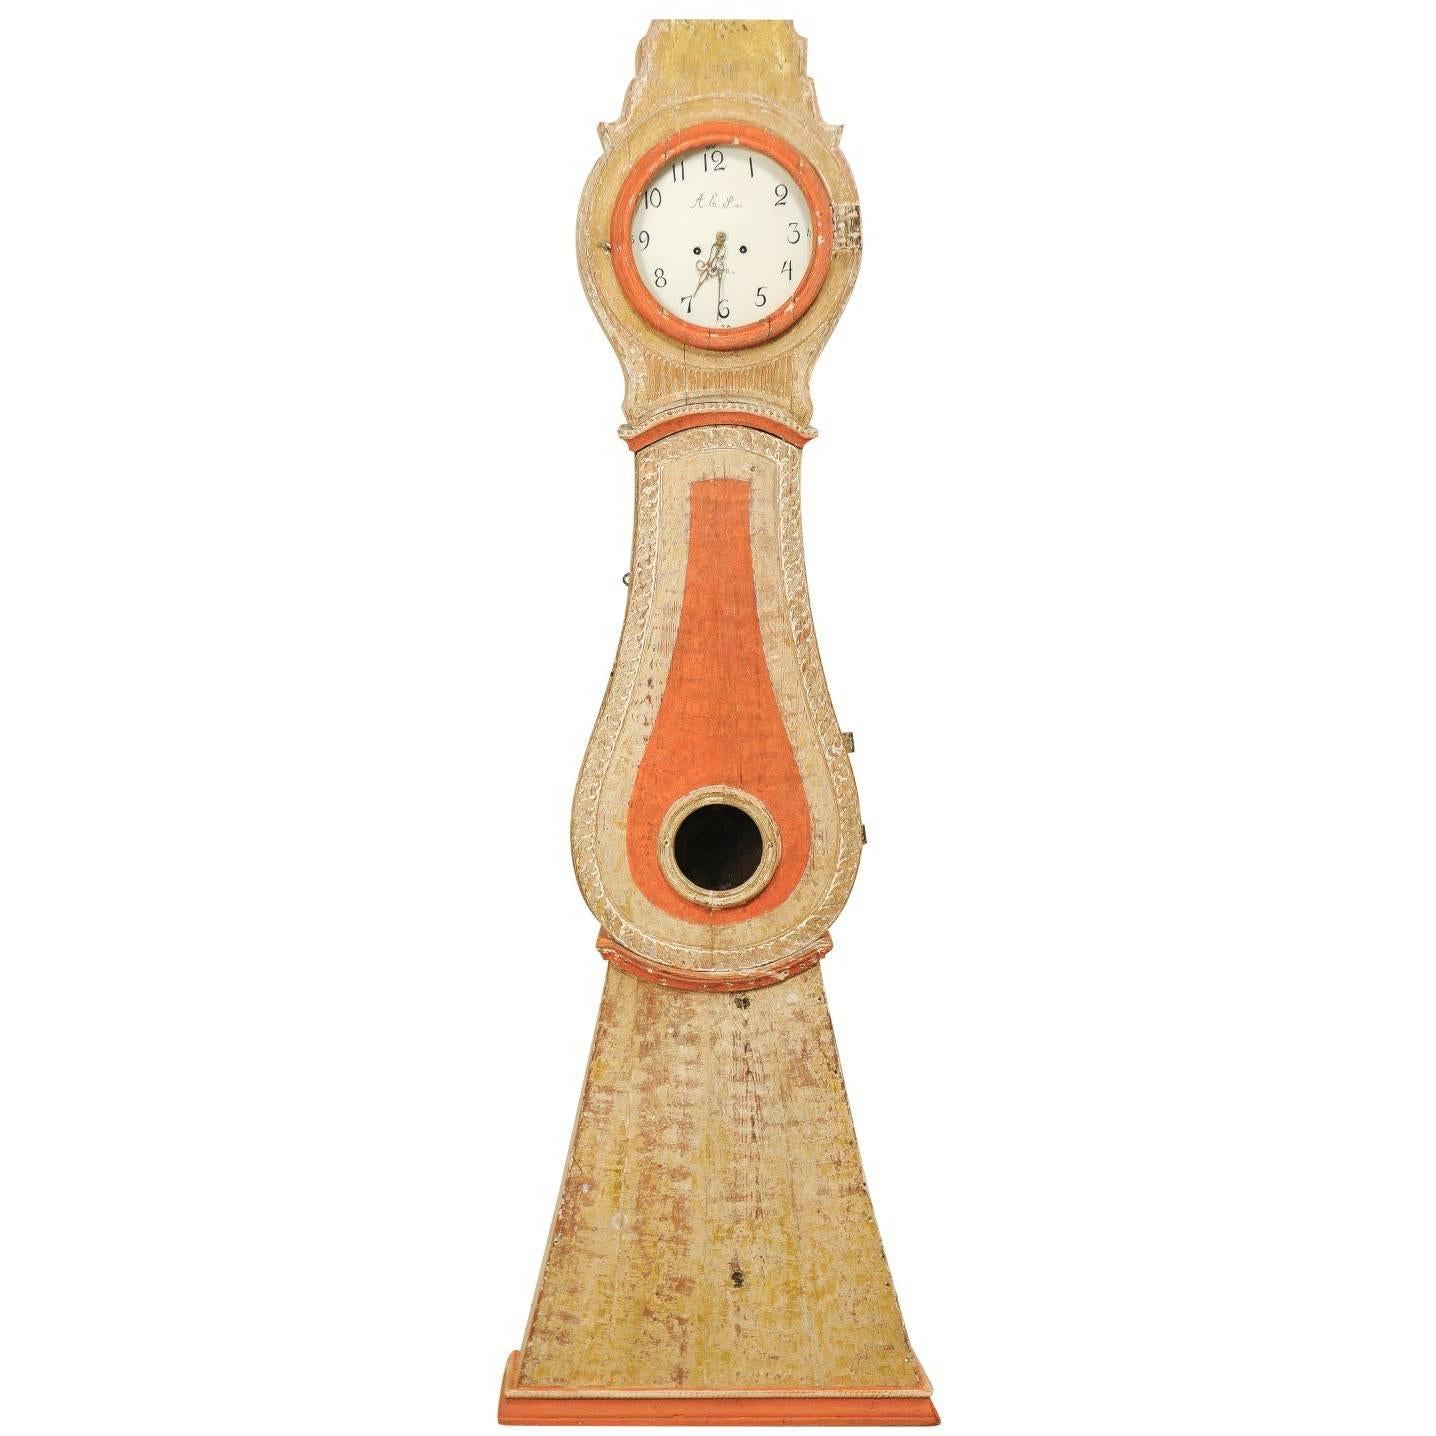 19th Century Painted Wood Swedish Clock with Warm Tangerine Accents